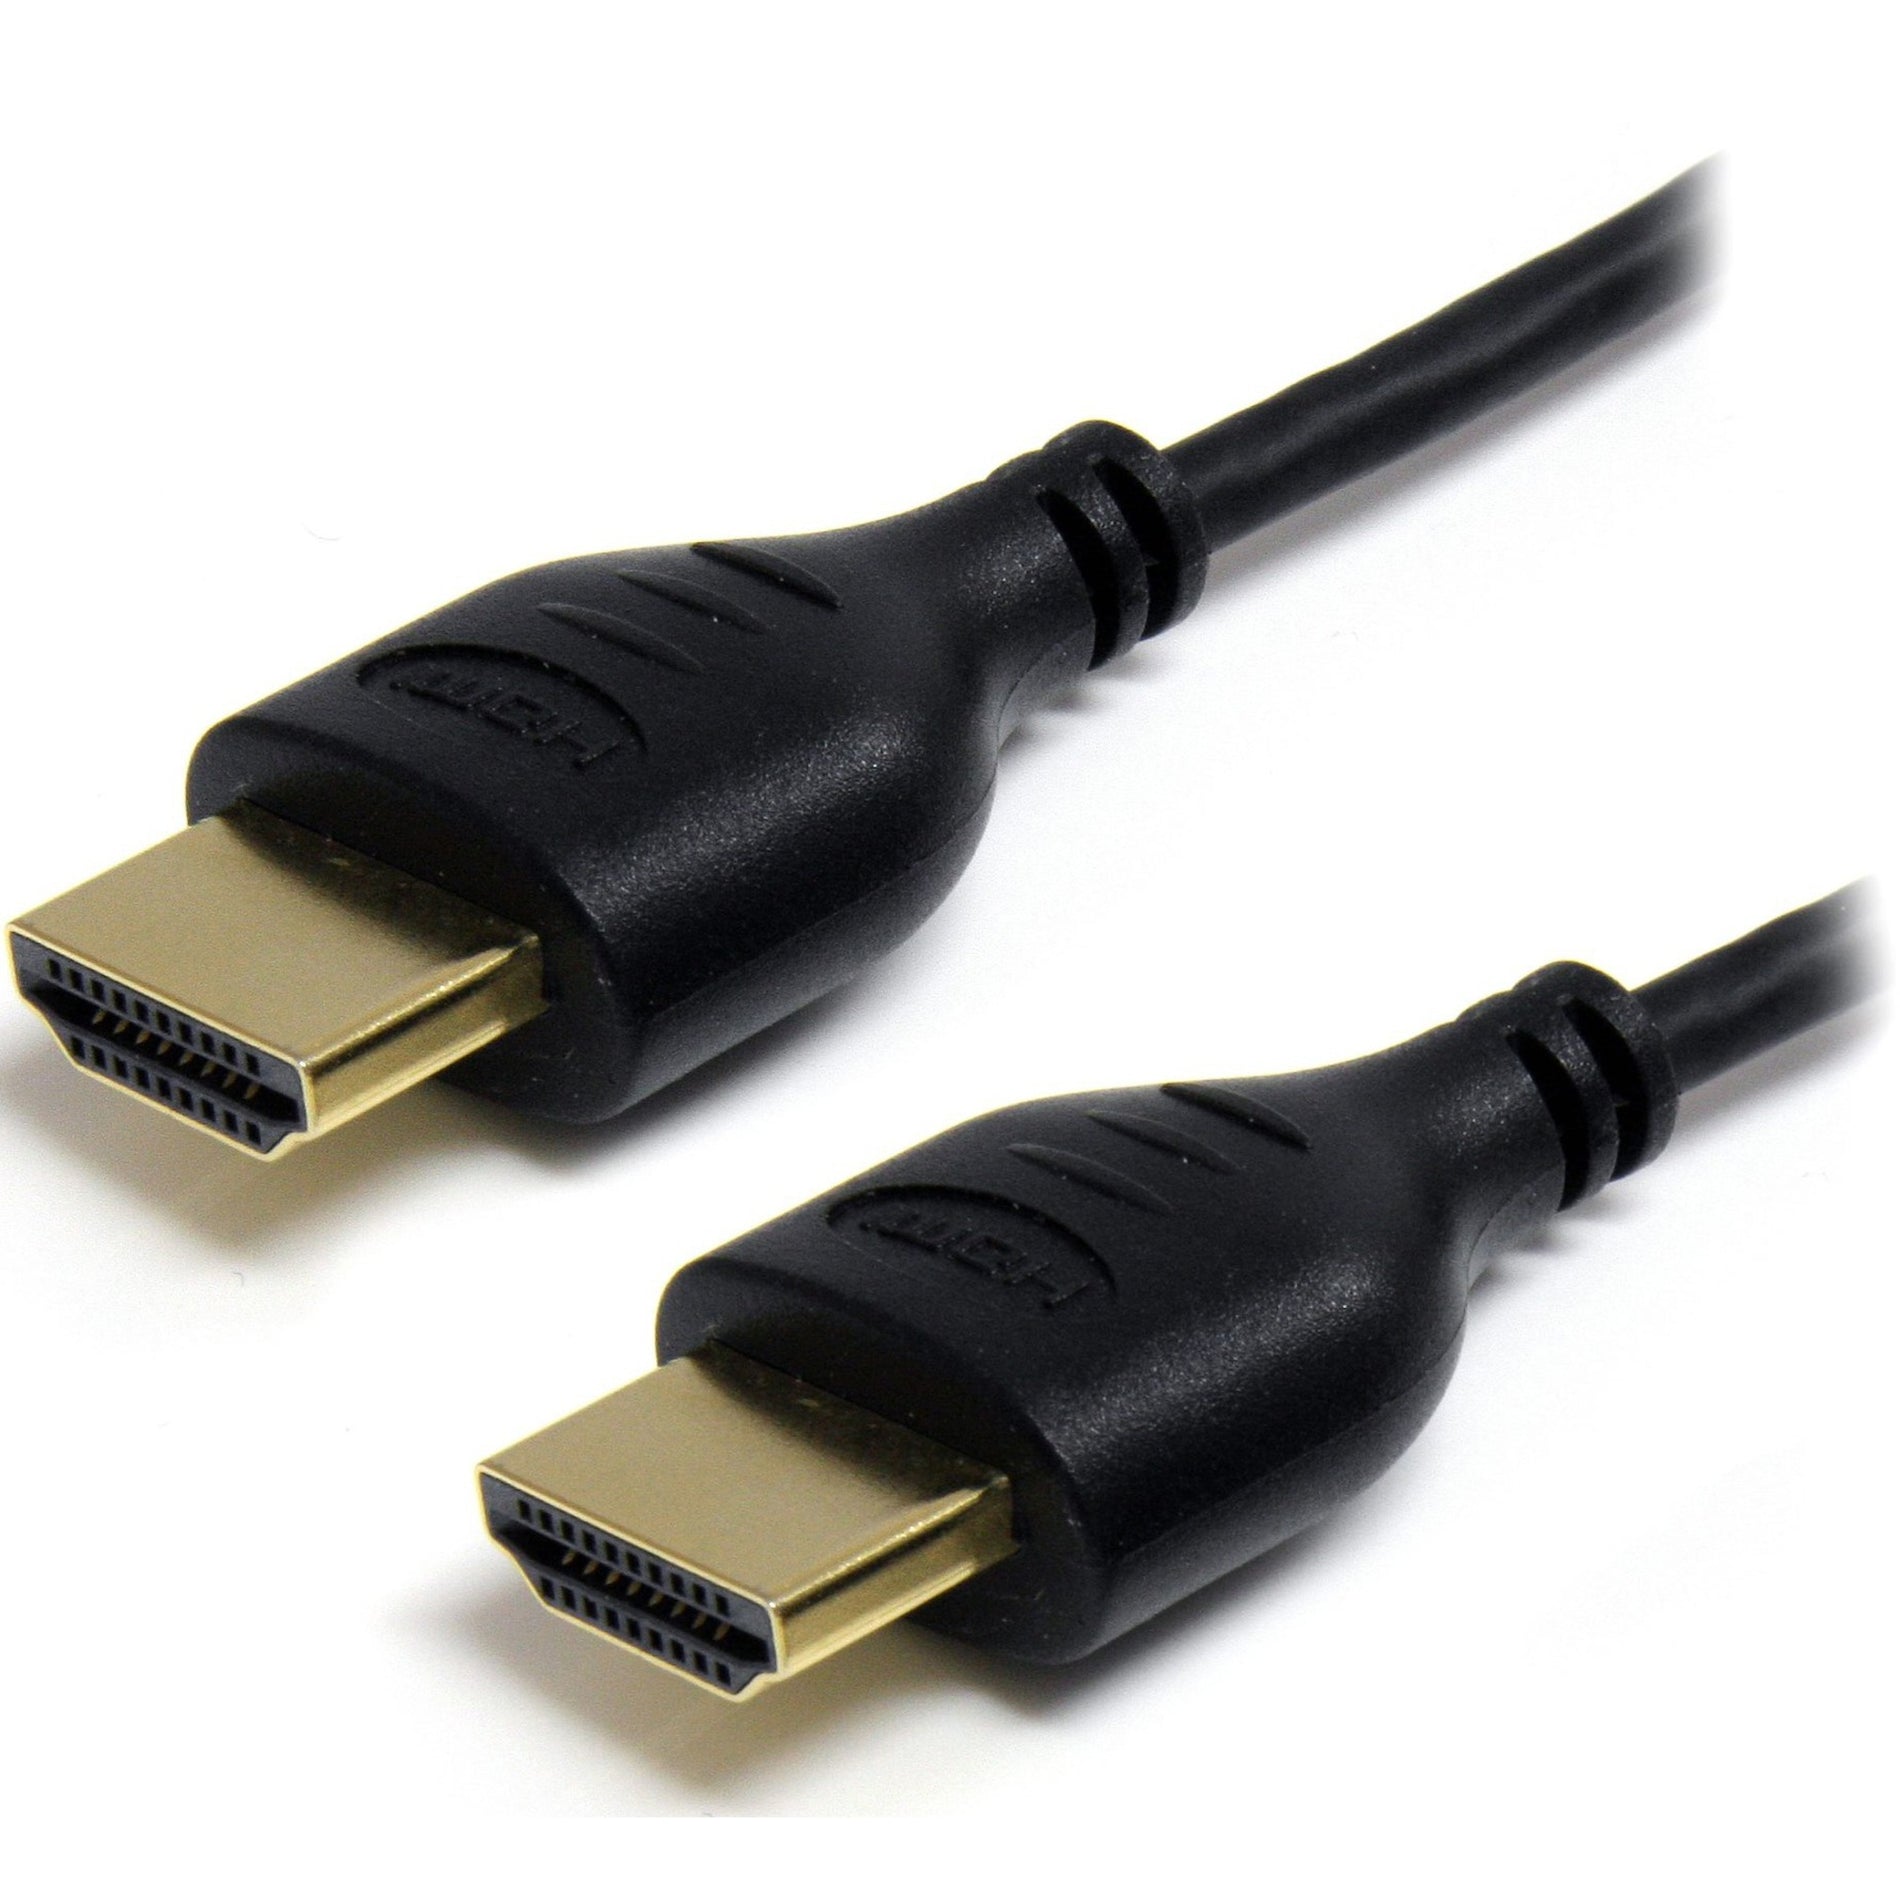 StarTech.com HDMIMM3HSS 3 ft High Speed Slim HDMI Digital Video Cable with Ethernet - M/M, Flexible, Corrosion Resistant, 4096 x 2160 Supported Resolution